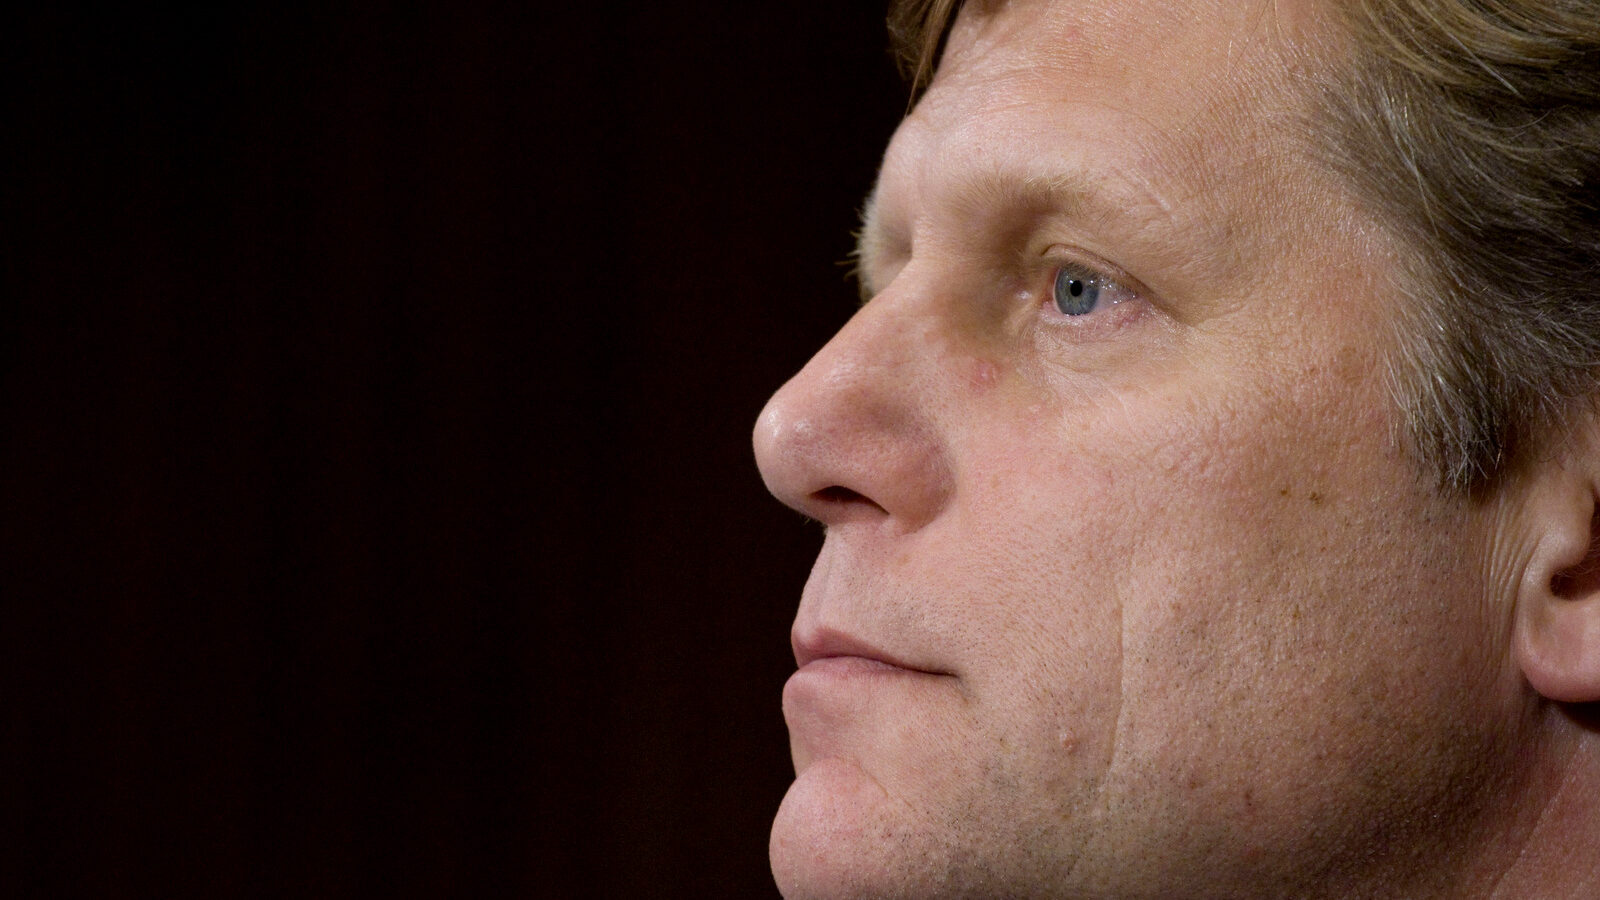 Michael McFaul, fierce Trump critic and former ambassador to Russia, told The Hill that the Russian ambassador was merely doing his job and that there is no evidence of any illicit collusion between him and the Trump campaign. (AP/Harry Hamburg)